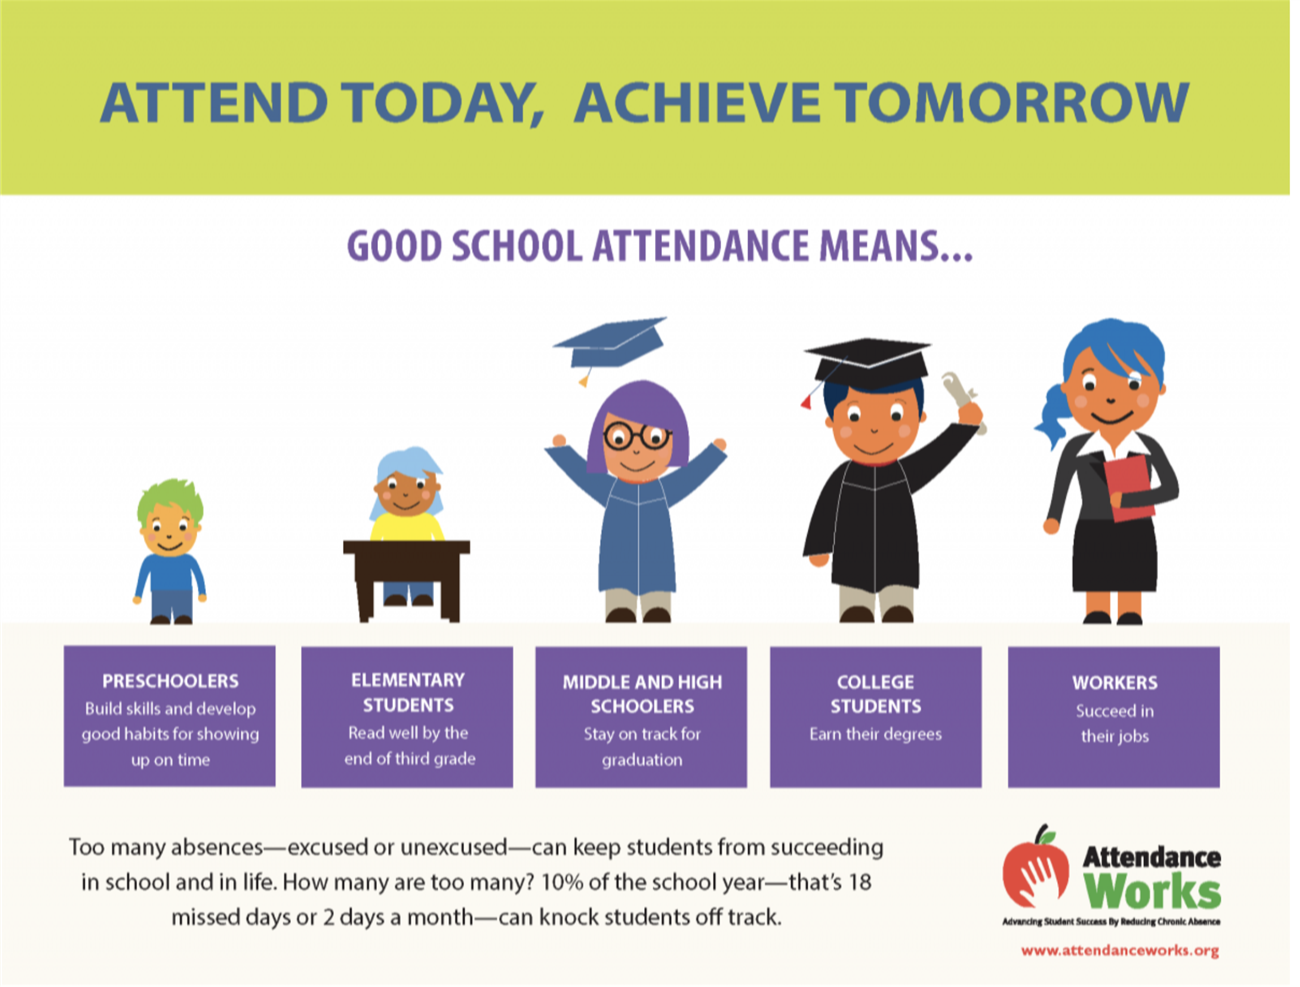 A poster with 5 people of varying ages with corresponding attendance benefits reading: Attend today, Achieve Tomorrow, good school attendance means... preschoolers, build skills and develop good habits for showing up on time. Elementary Students - Read well by the end of the third grade. Middle and High Schoolers, Stay on track for graduation. College students - Earn their degrees. Workers, Succeed in their jobs. Too many absences , excused or unexcused can keep students from succeeding in school and in life. How many are too Many? 10% of the school year- that is 18 days or 2 days a month can knock students off track. 